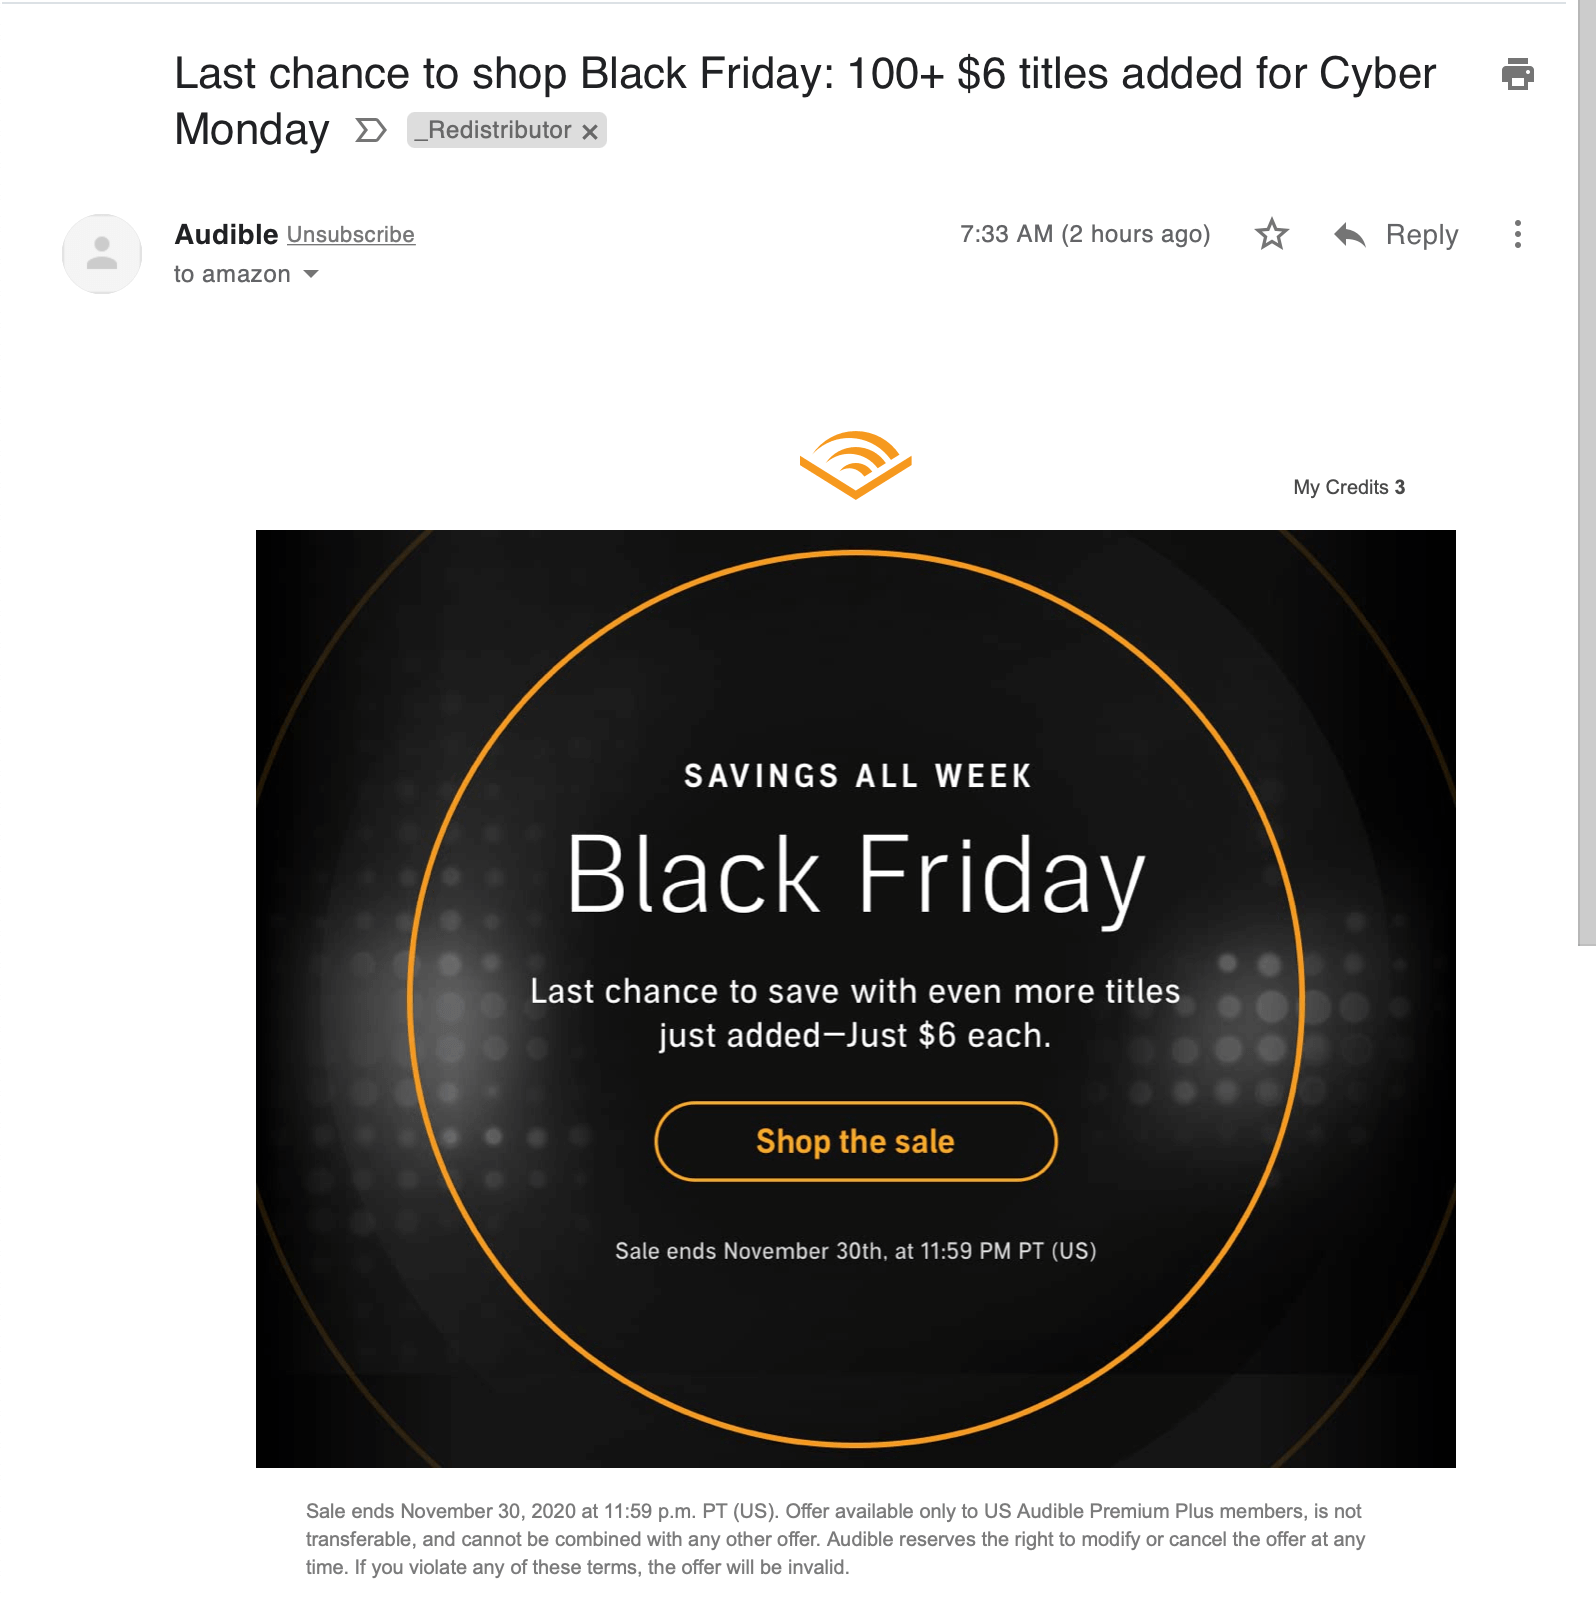 Email from Audible after loading images